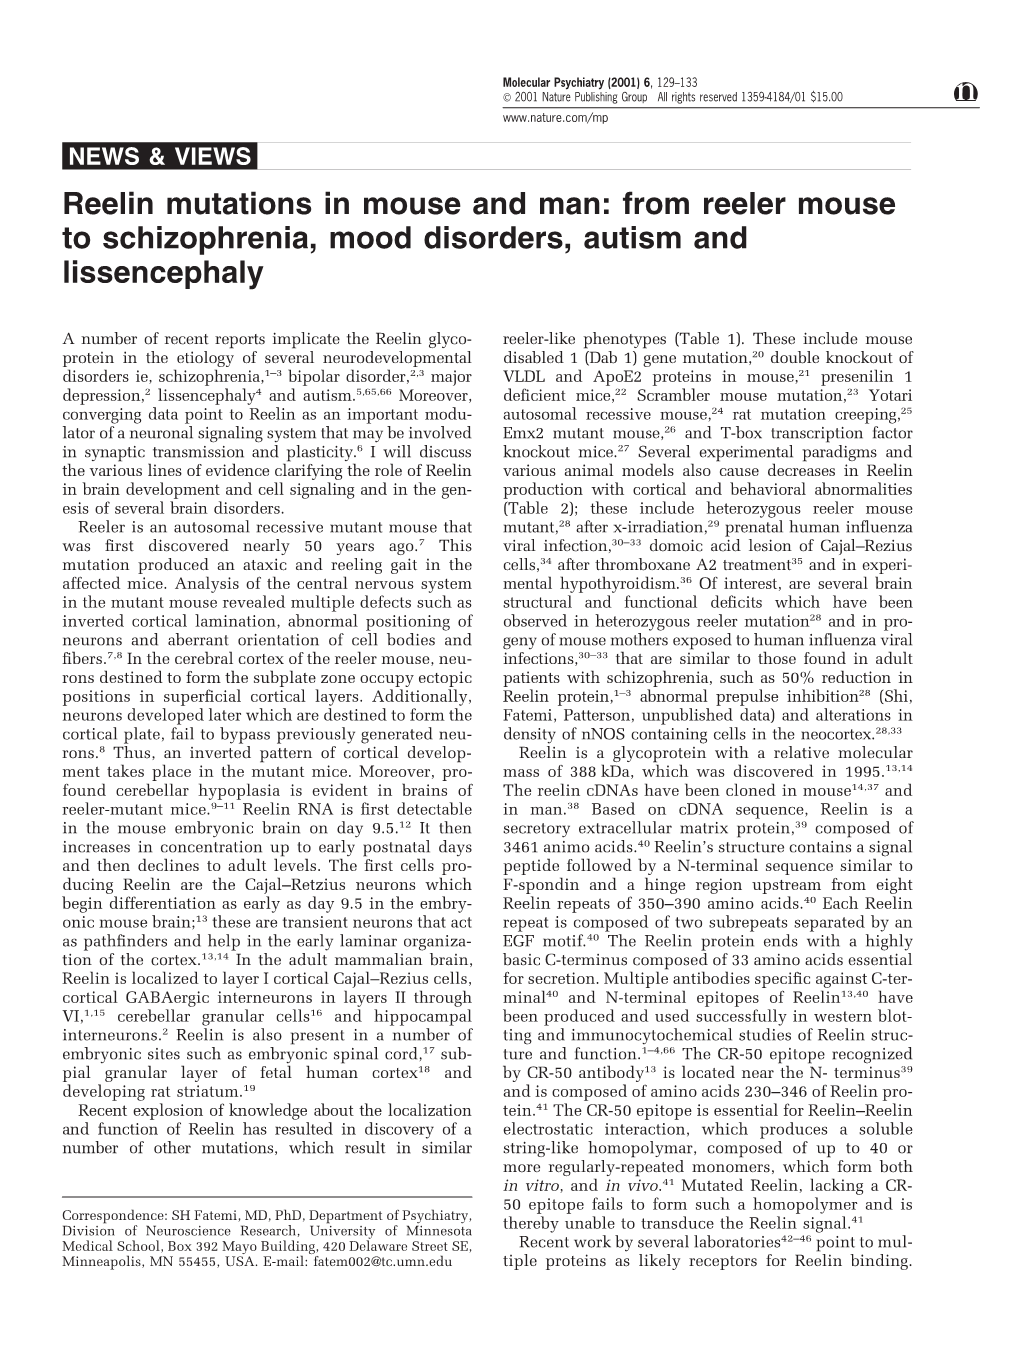 Reelin Mutations in Mouse and Man: from Reeler Mouse to Schizophrenia, Mood Disorders, Autism and Lissencephaly